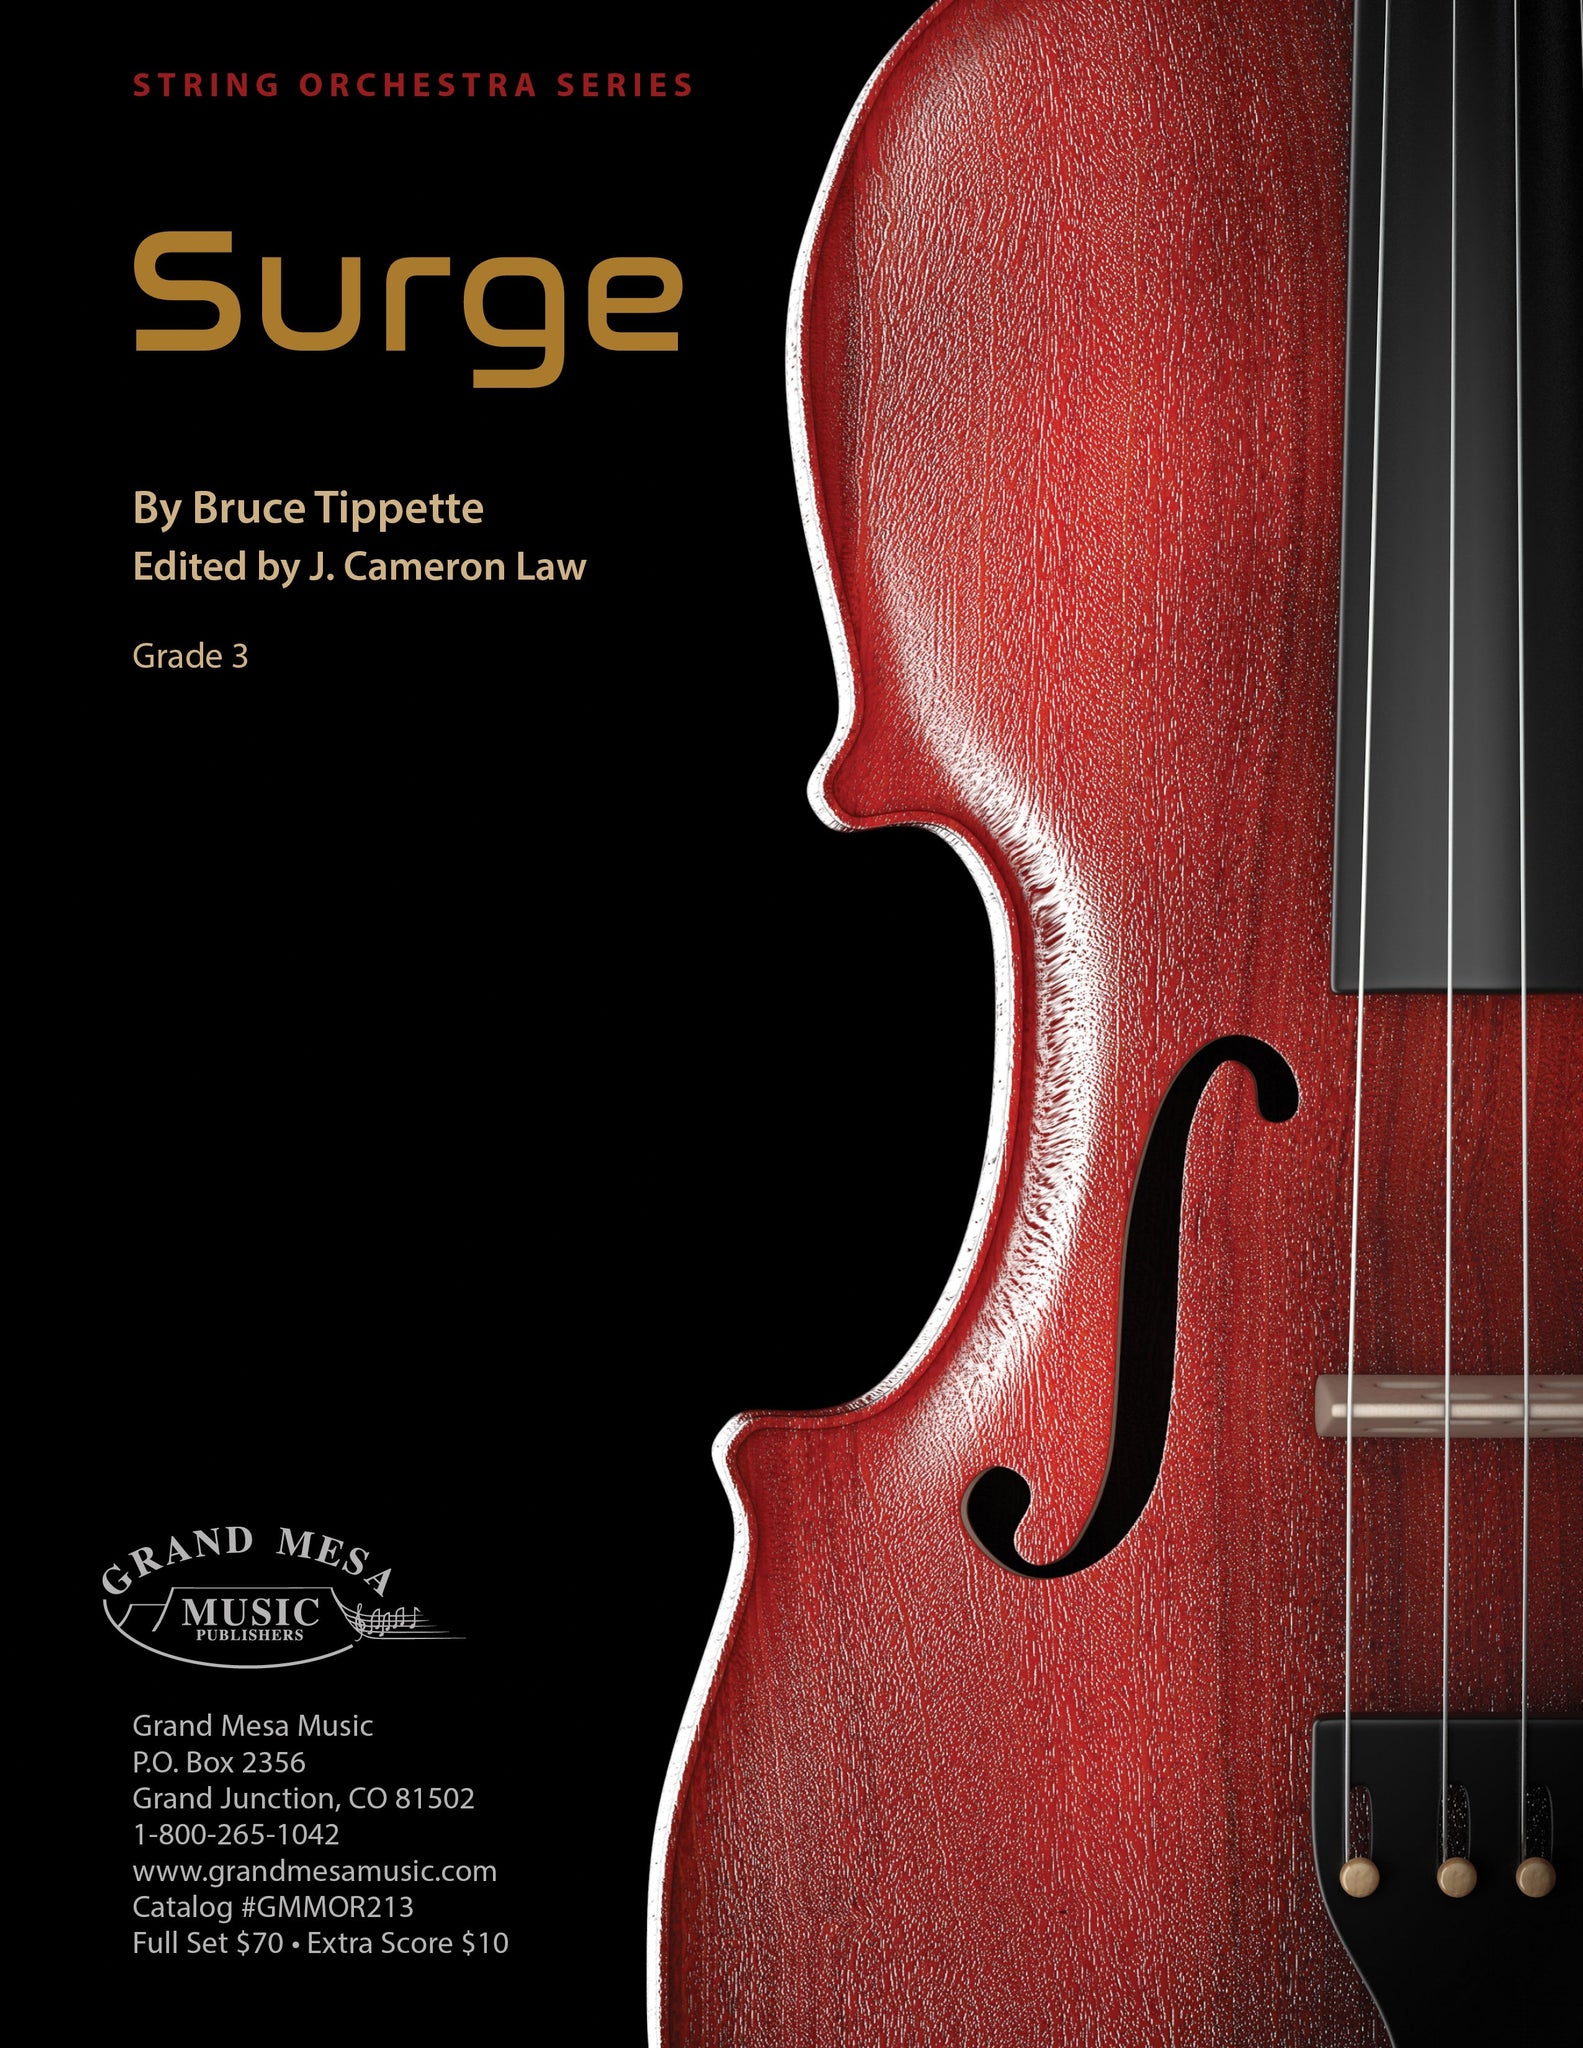 Strings sheet music cover of Surge, composed by Bruce Tippette.